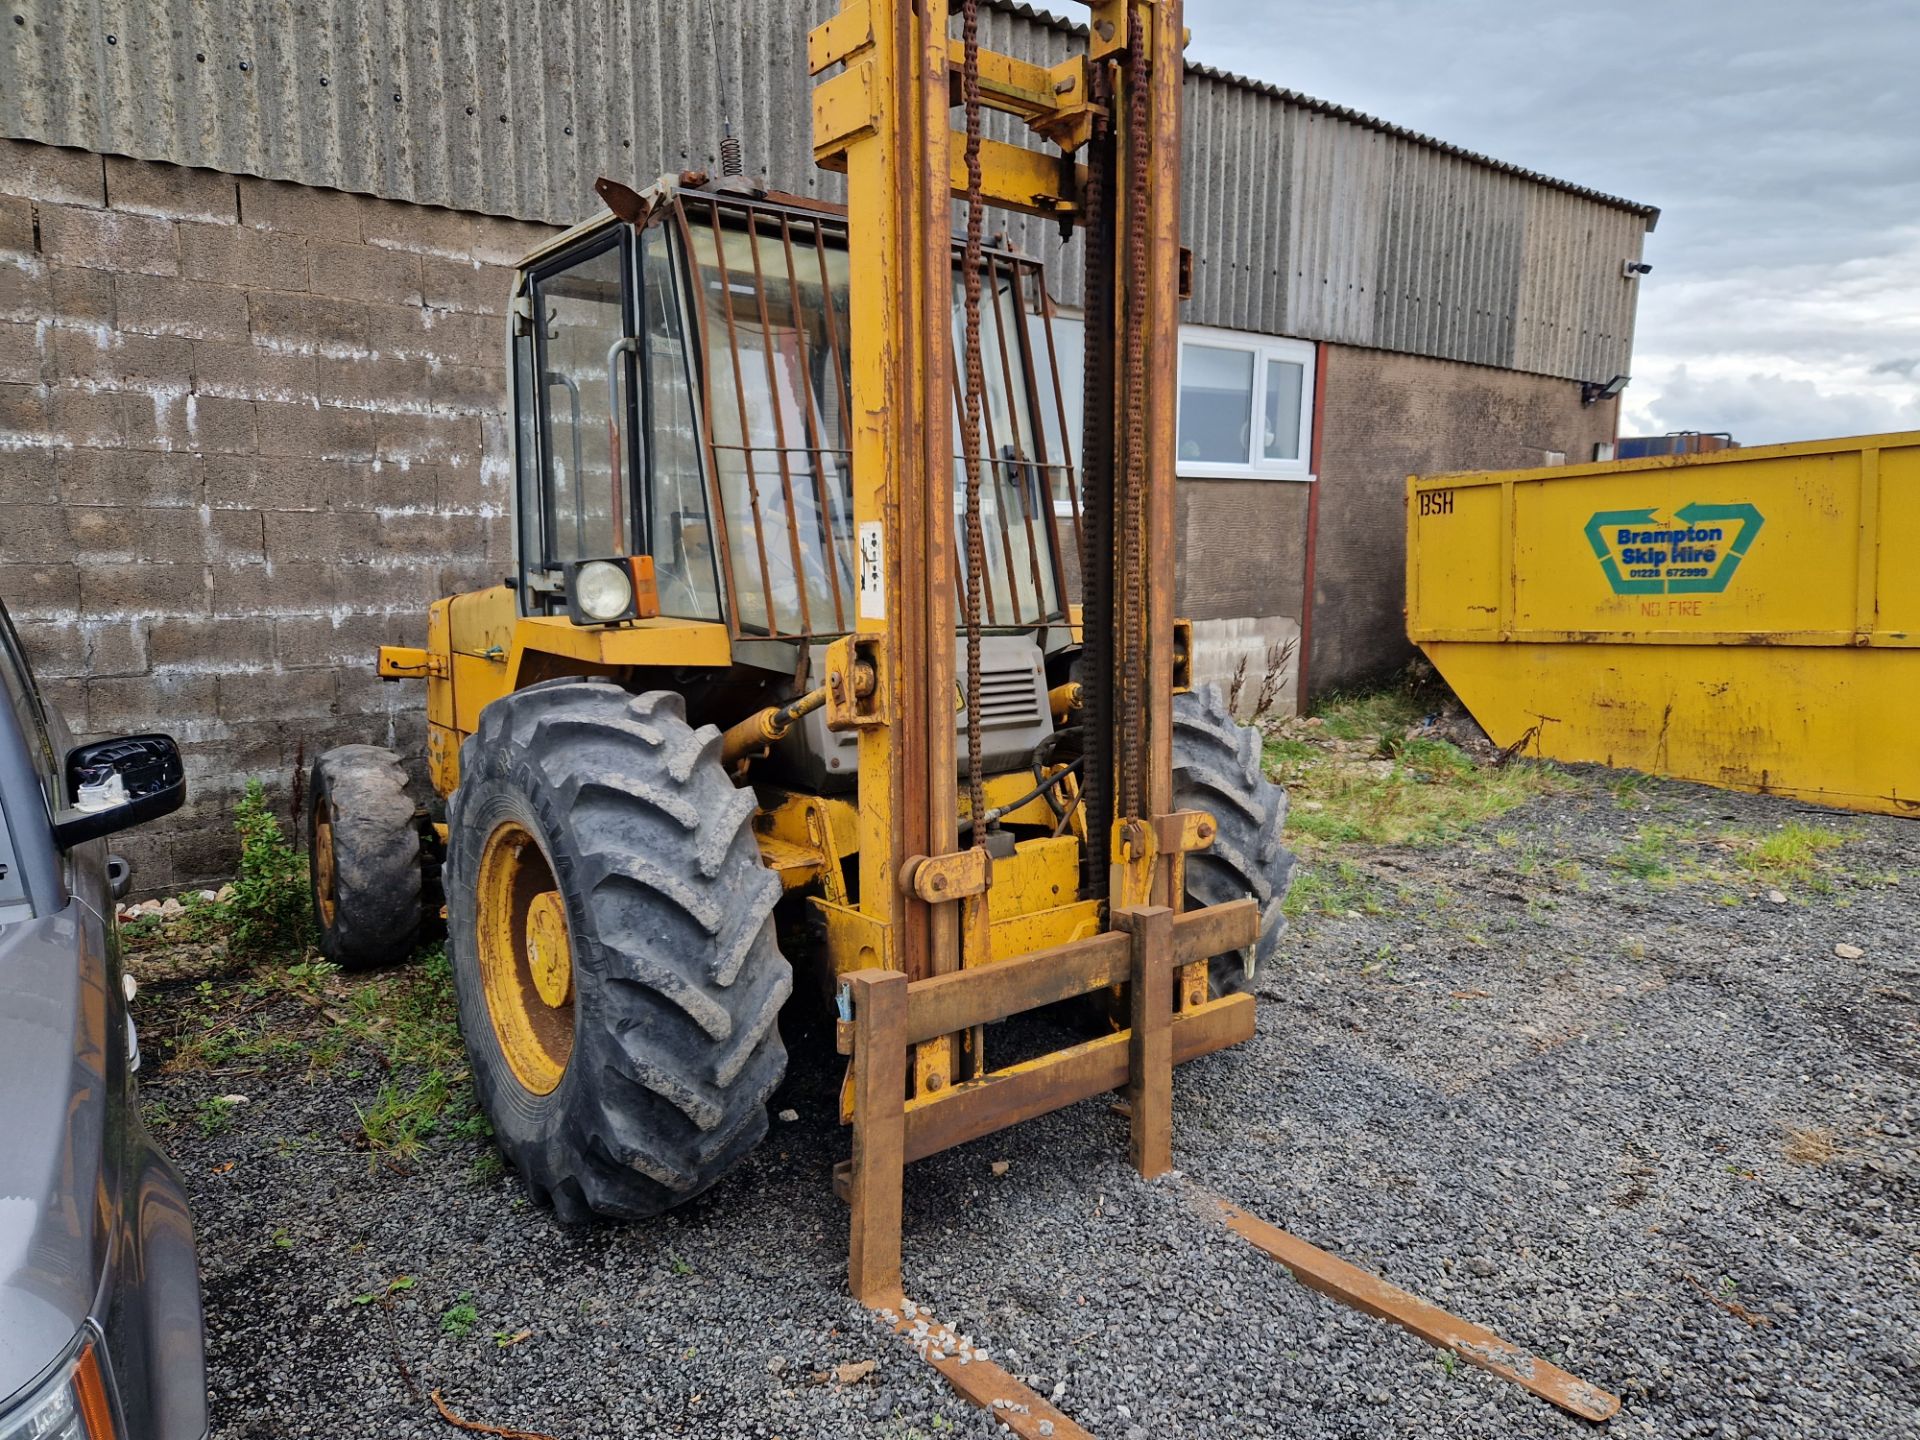 JCB 926 Rough Terrain Fork Lift Truck, YoM 1985, No key, Running State Unknown Please read the - Image 2 of 9